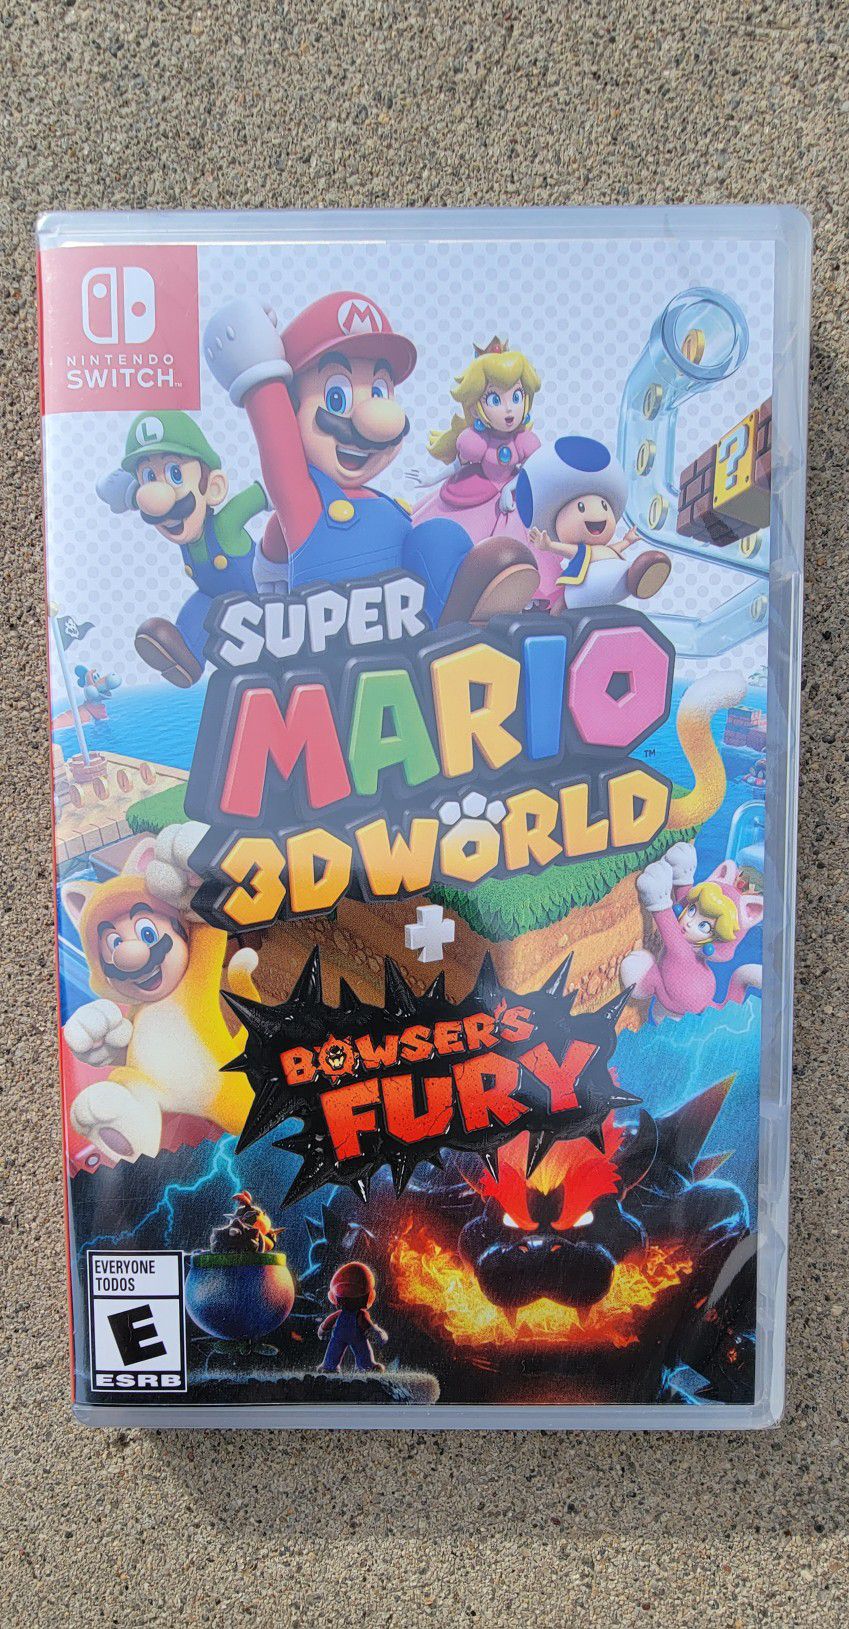 Super Mario 3D World + Bowser's Fury - Nintendo Switch Game - New Sealed 